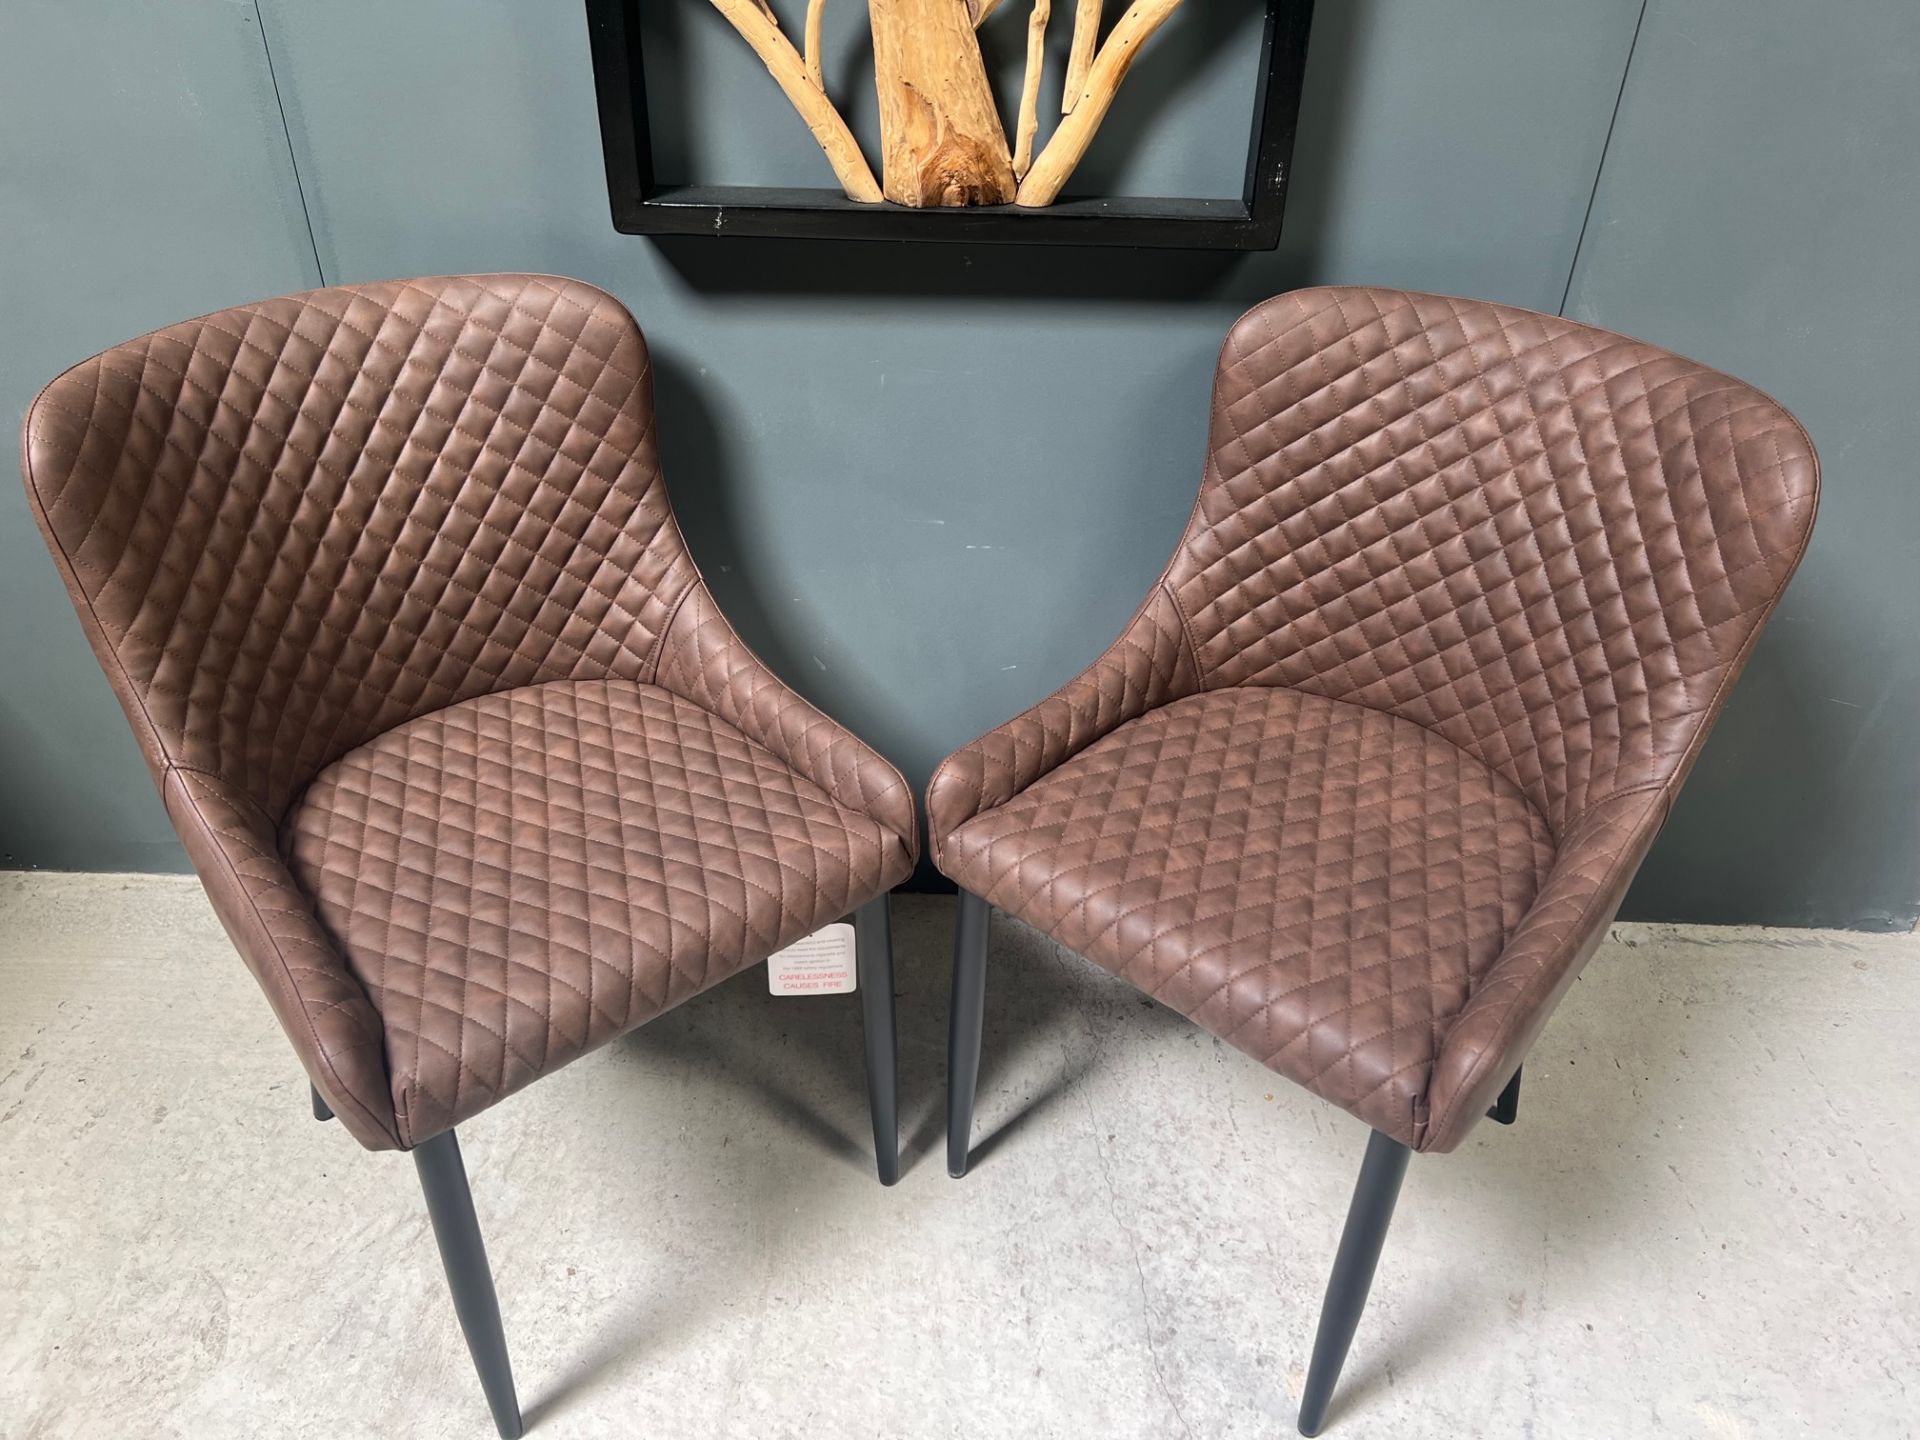 PAIR OF BRAND NEW BOXED CLASSIC PU LEATHER DINING CHAIRS IN BROWN - Image 2 of 7